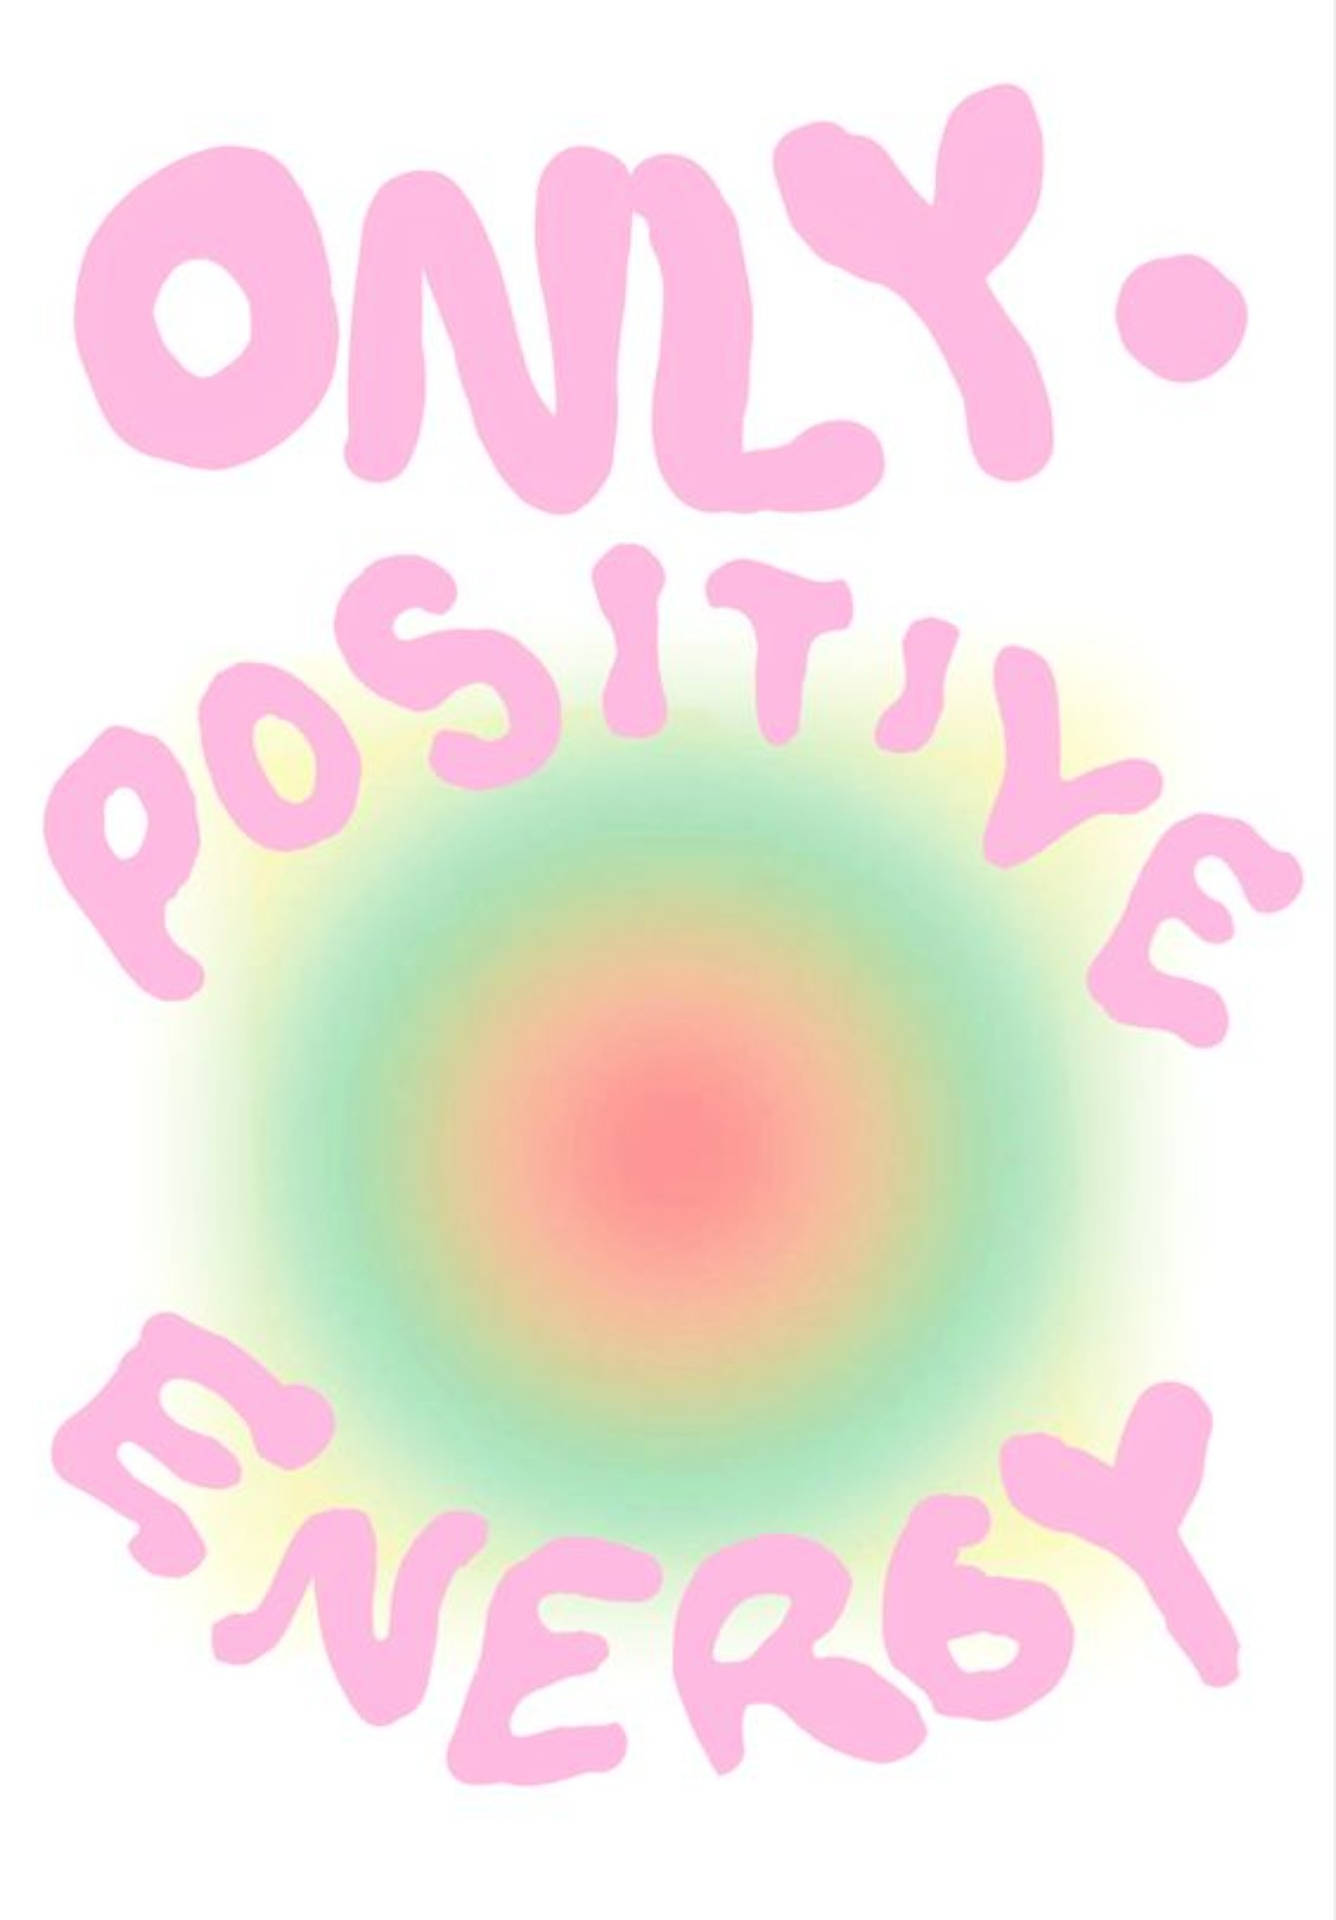 Only Positive Energy Quotes